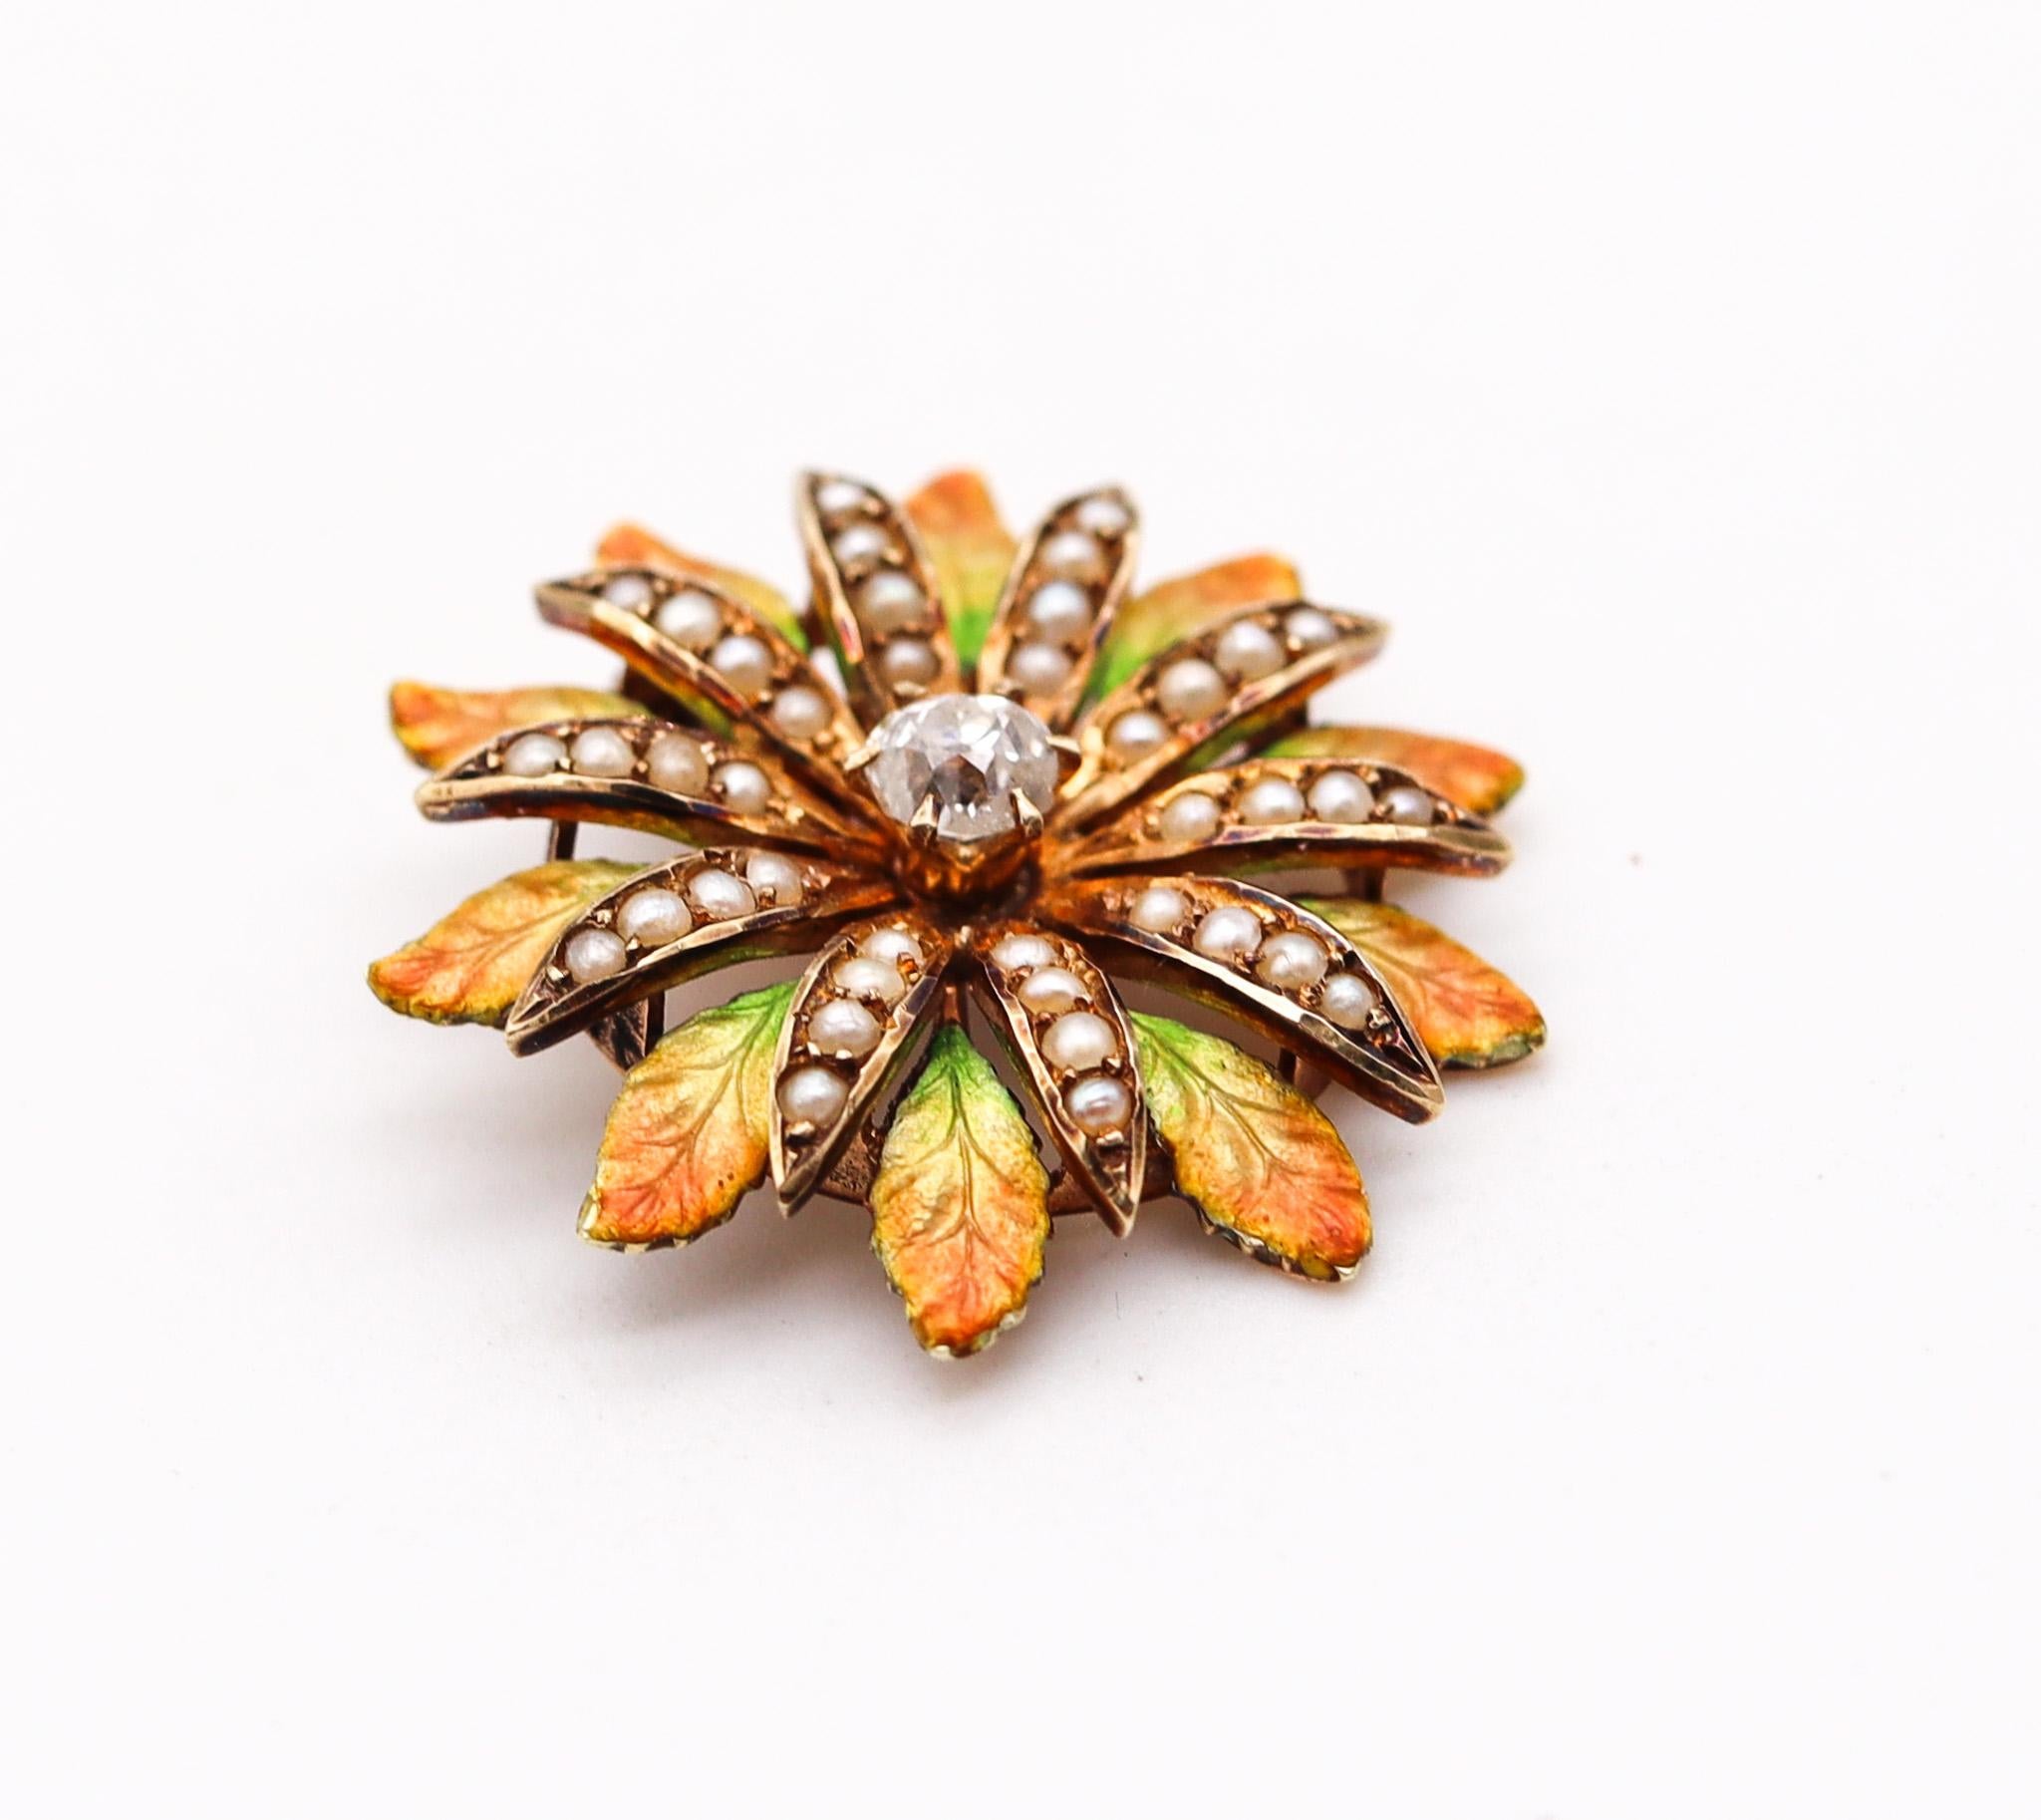 Edwardian enameled flower convertible brooch.

An extremely beautiful piece, created in America during the Edwardian and the Art Nouveau periods, back in the 1900-1910. This outstanding convertible pendant-brooch has been carefully crafted in the